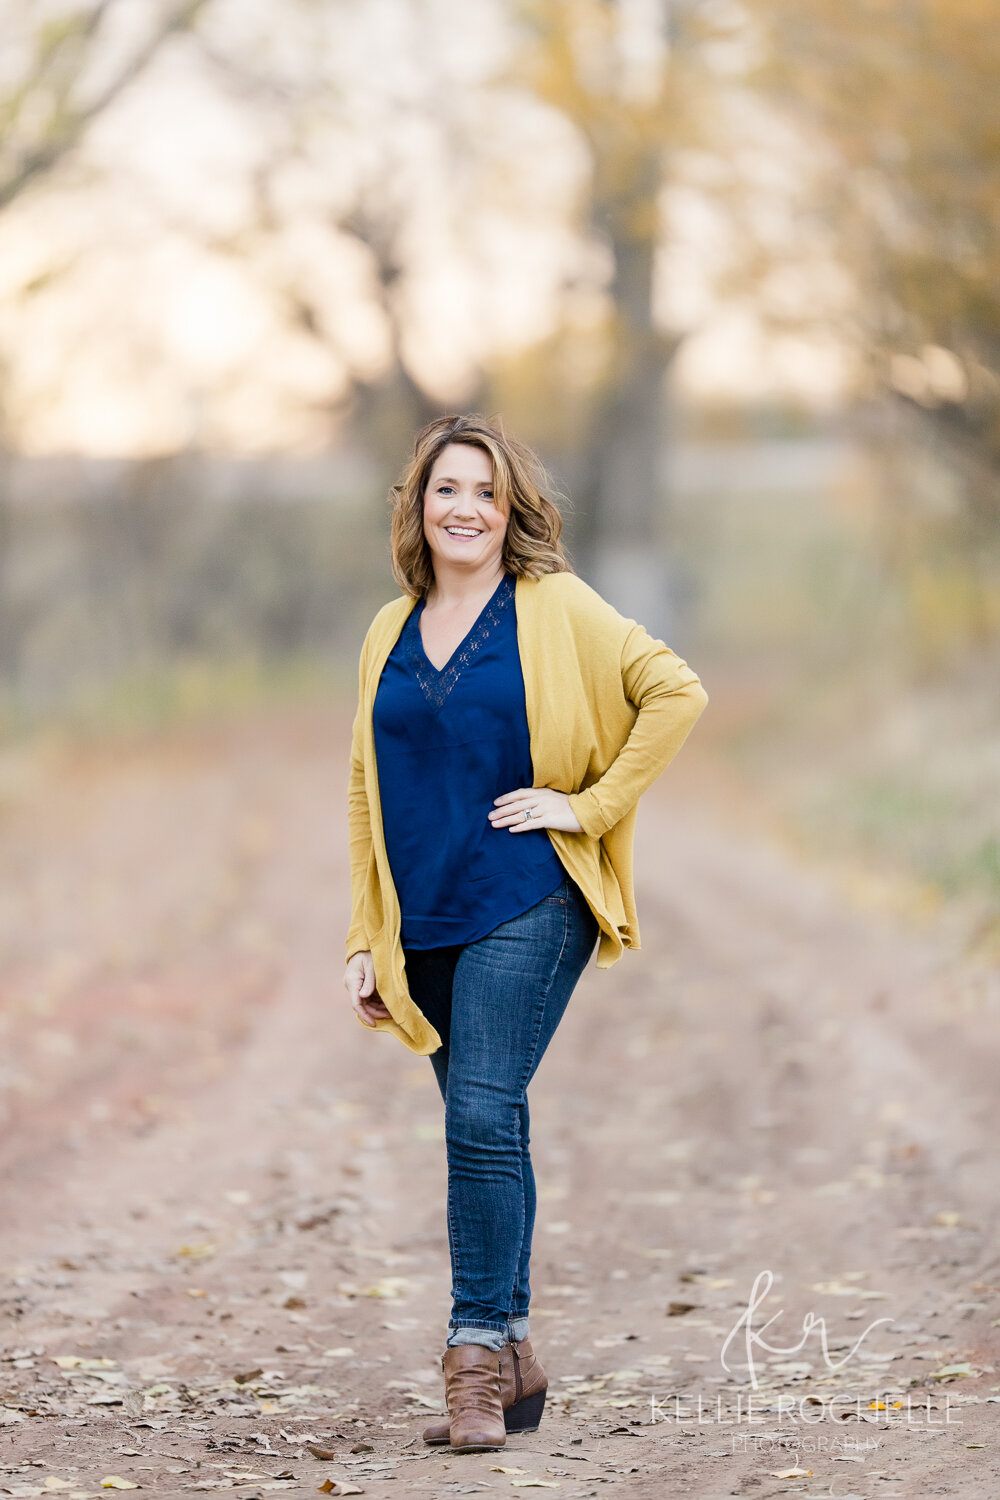 women full body picture with yellow and navy clothing